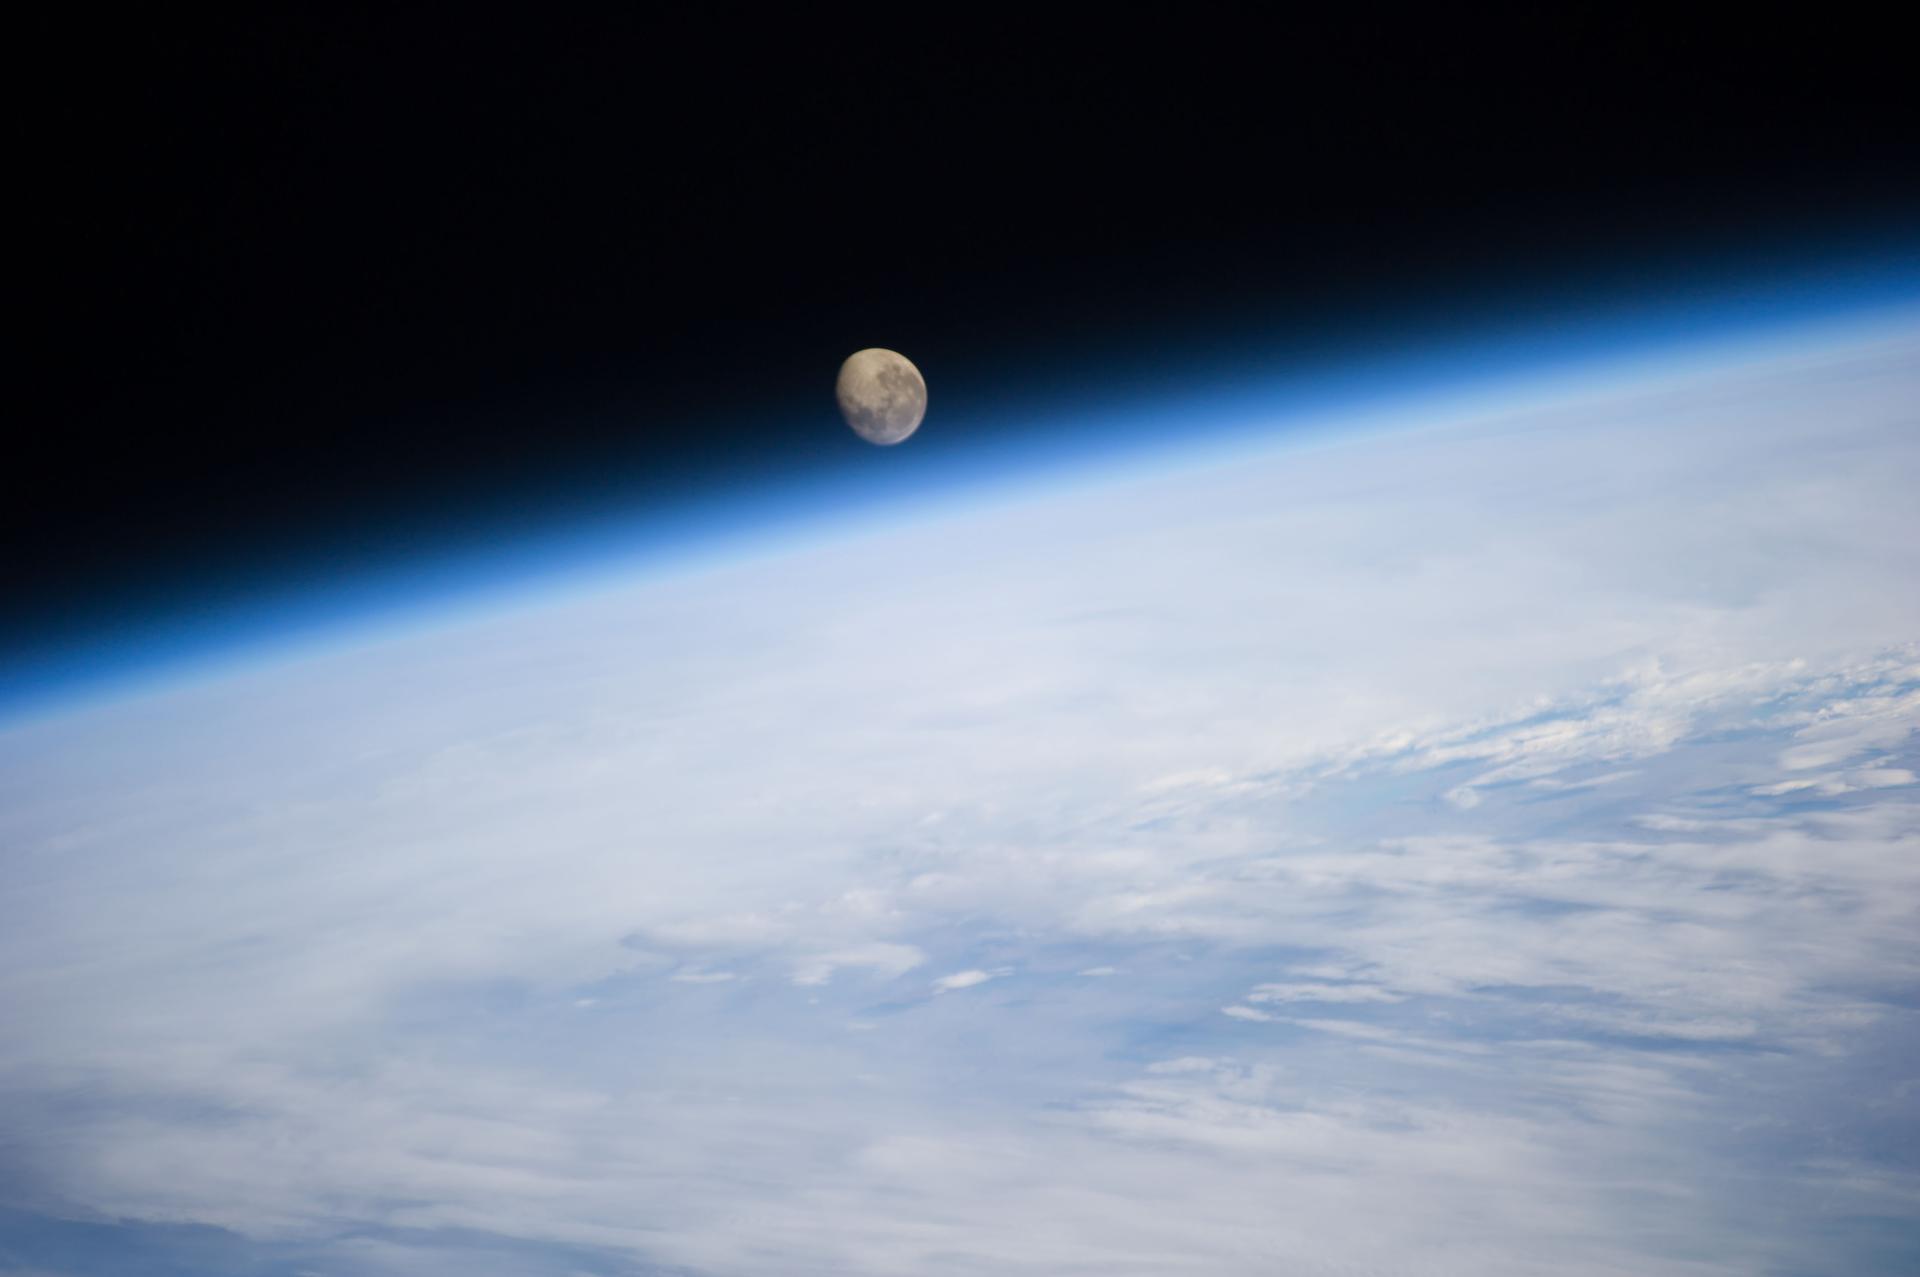 The moonset behind Earth, as viewed from the International Space Station.